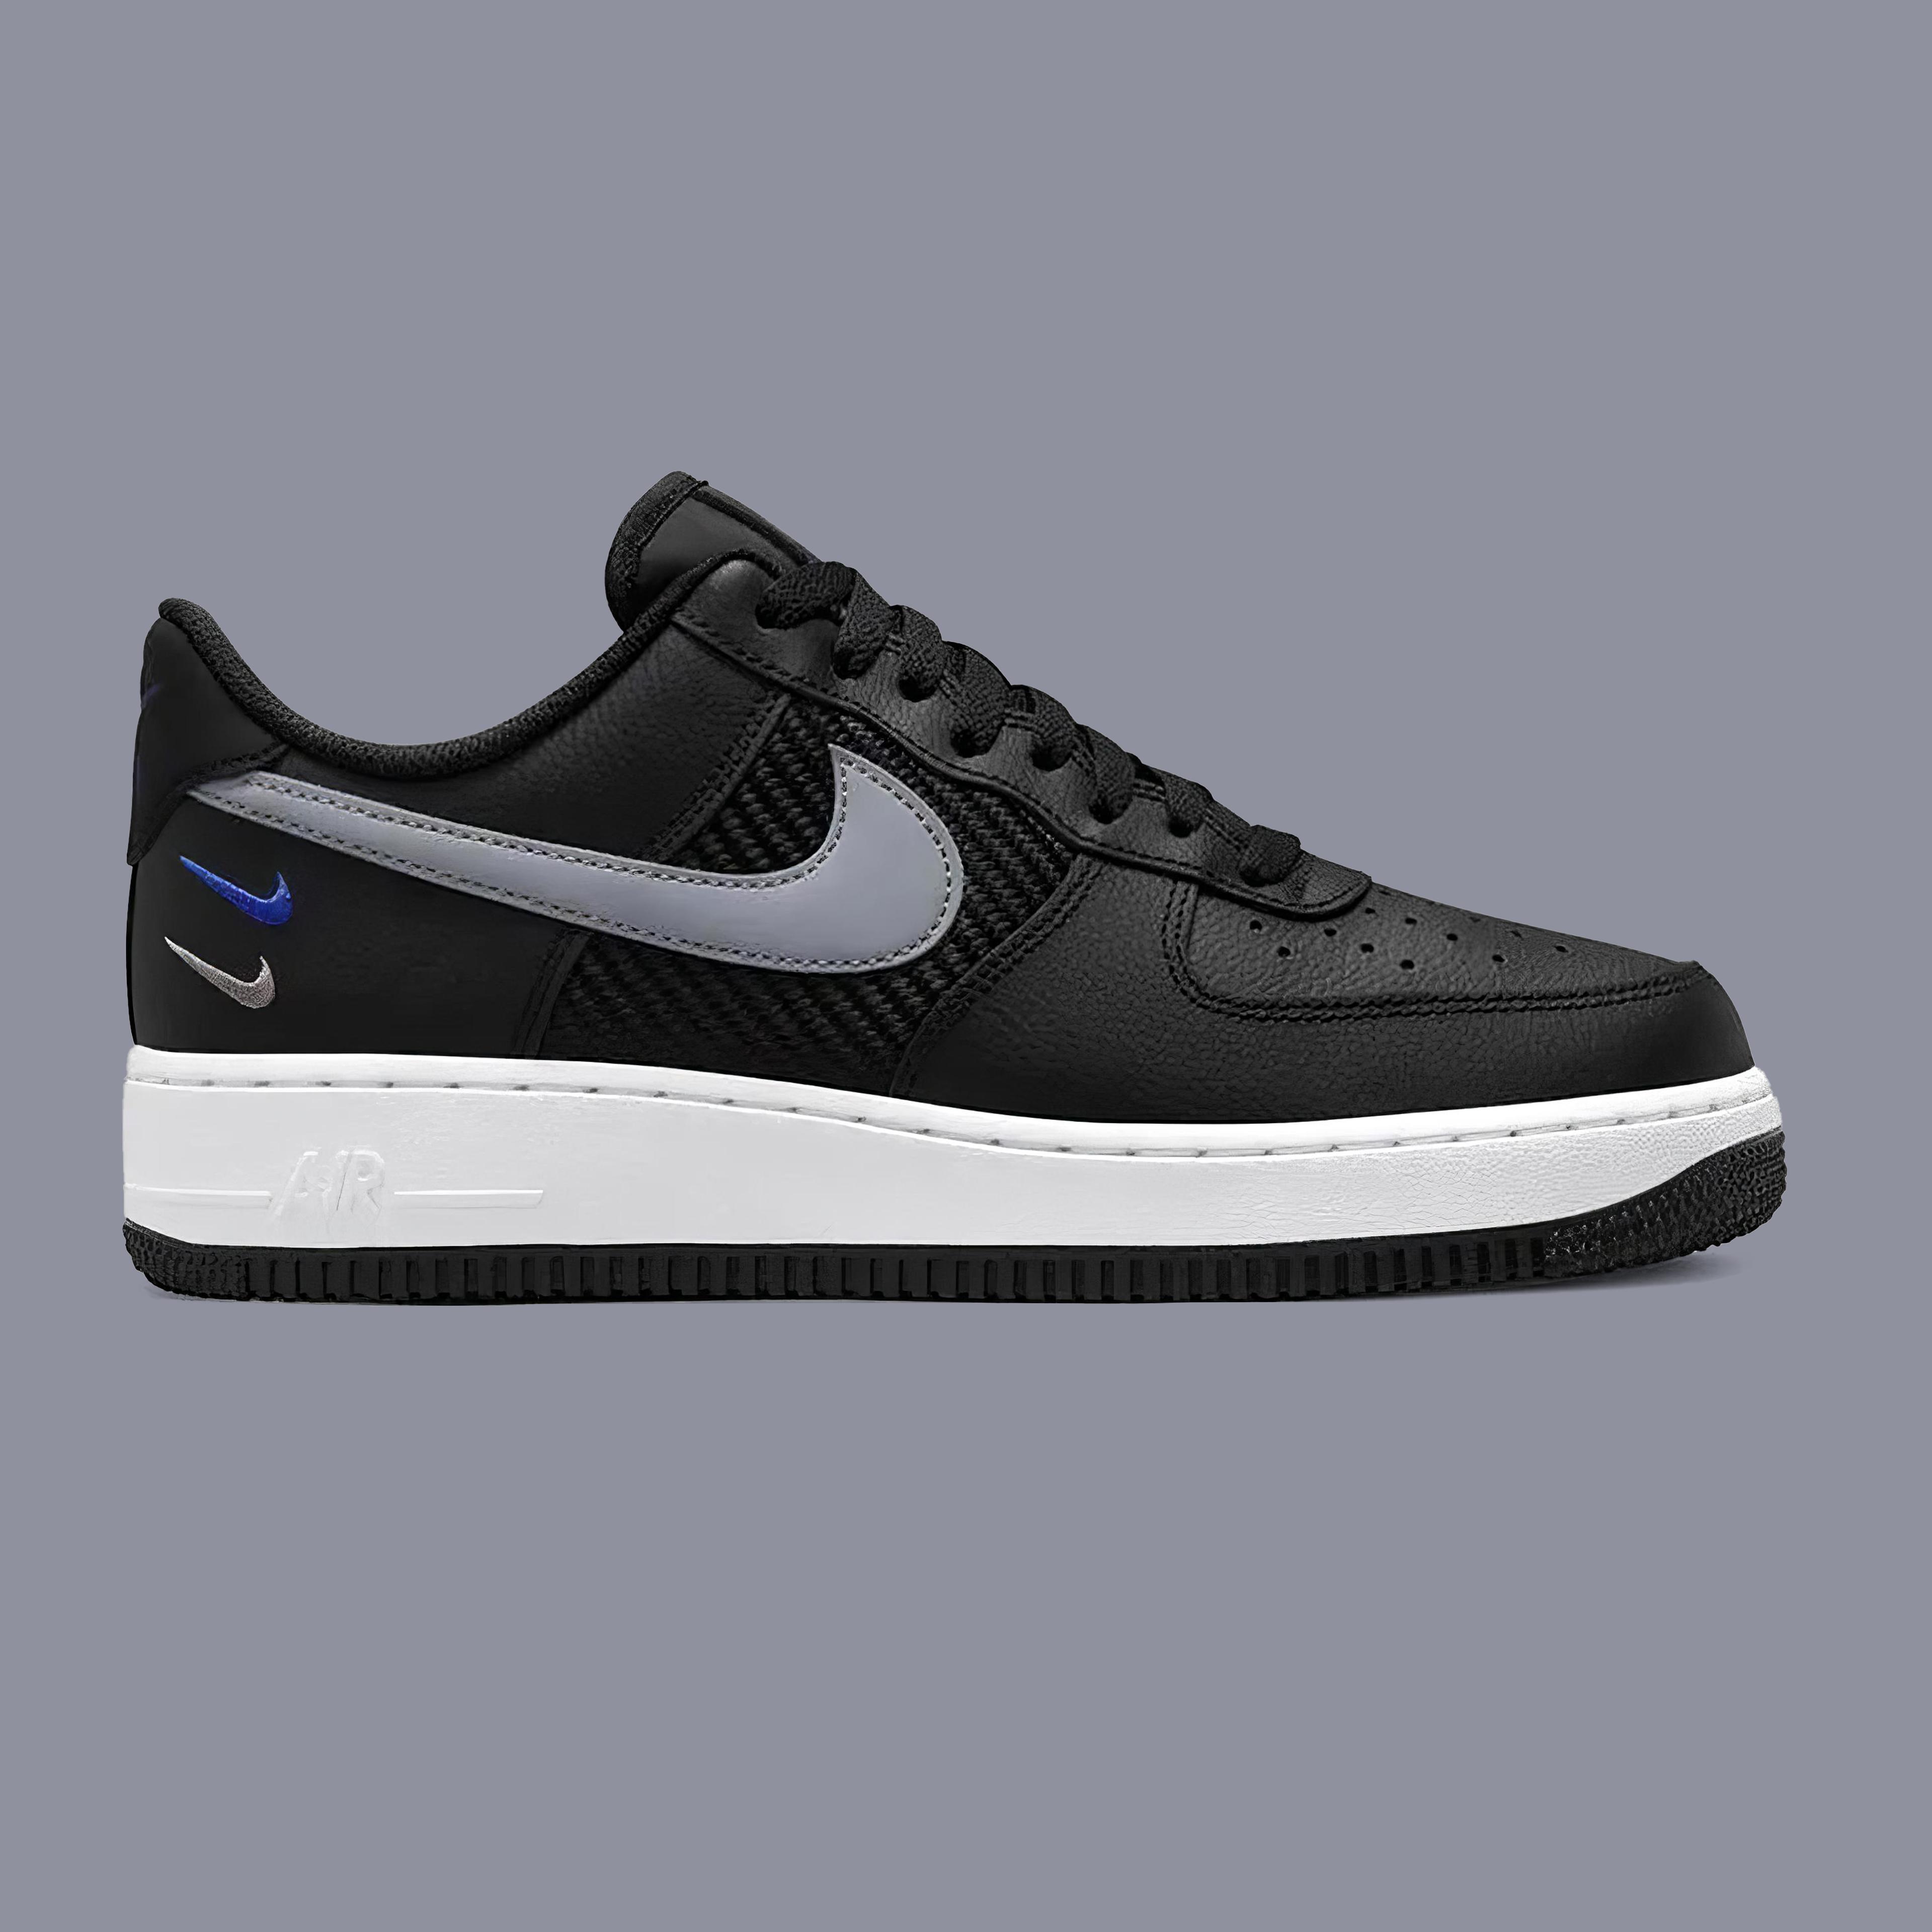 Air Force 1 '07 Casual Shoes Black/Grey/Blue